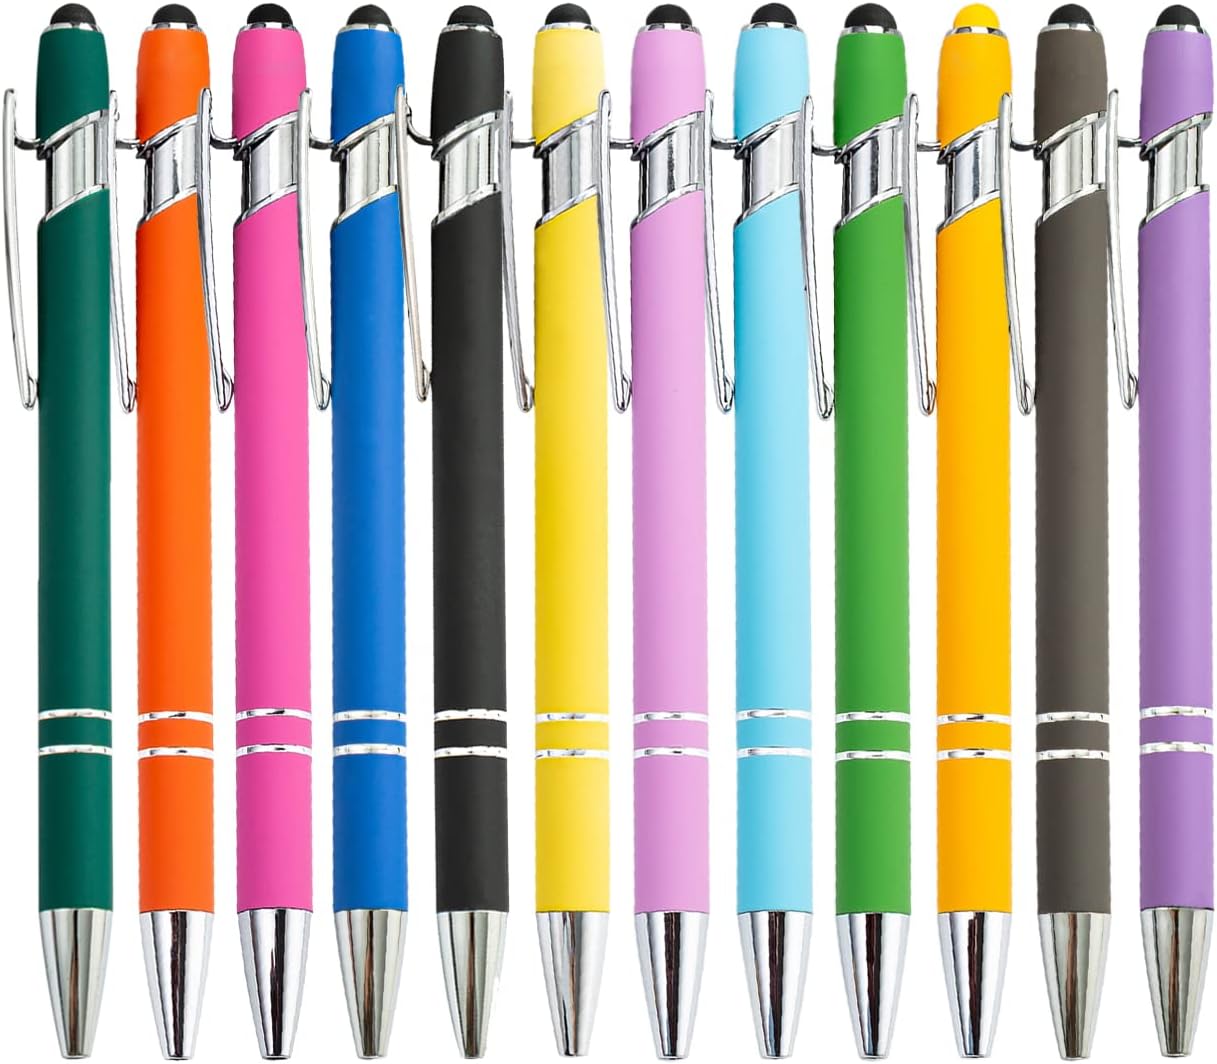 12 Pack Rainbow Rubberized Soft Touch Ballpoint Pen with Stylus Tip